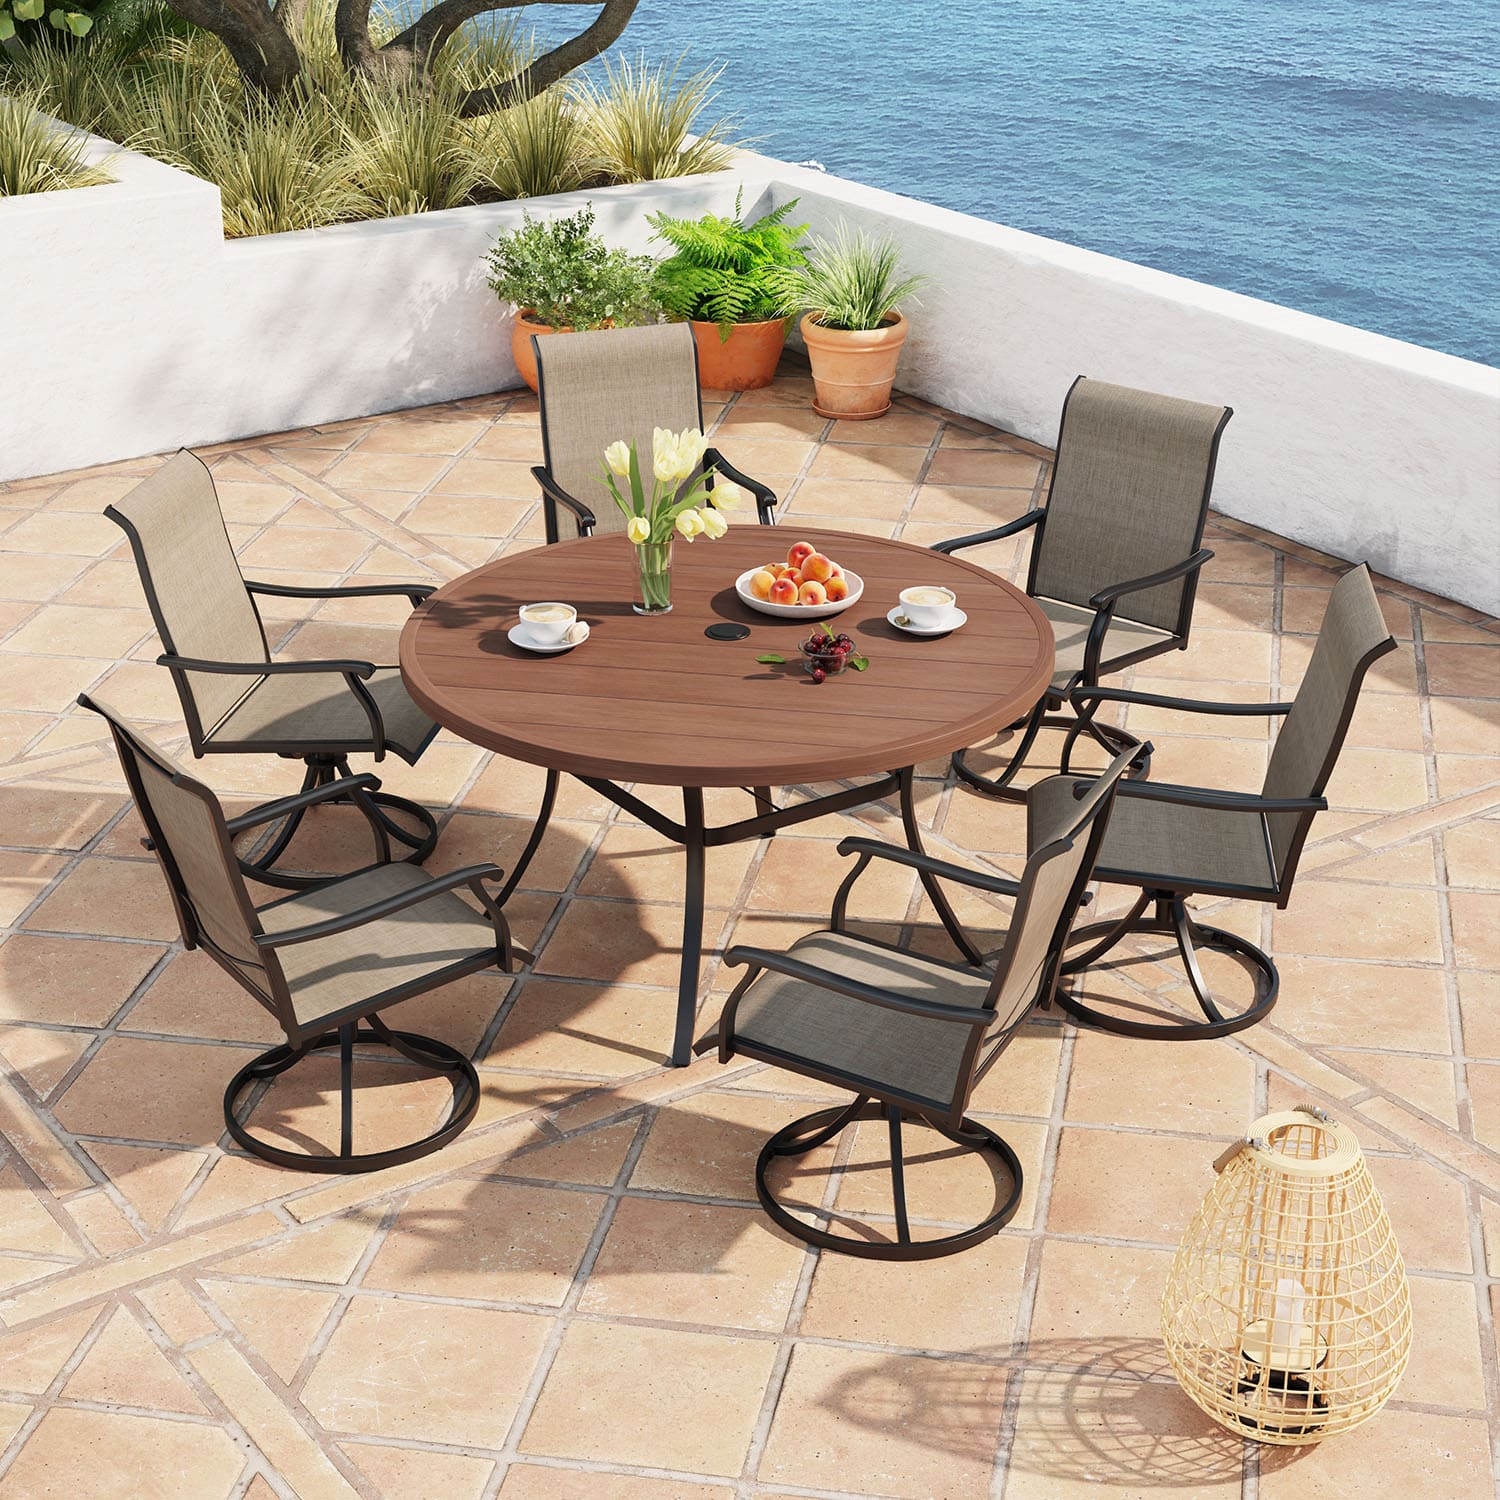 Vicllax 7 Pieces Outdoor Dining Set with 54" Round Dining Table and Swivel Chairs